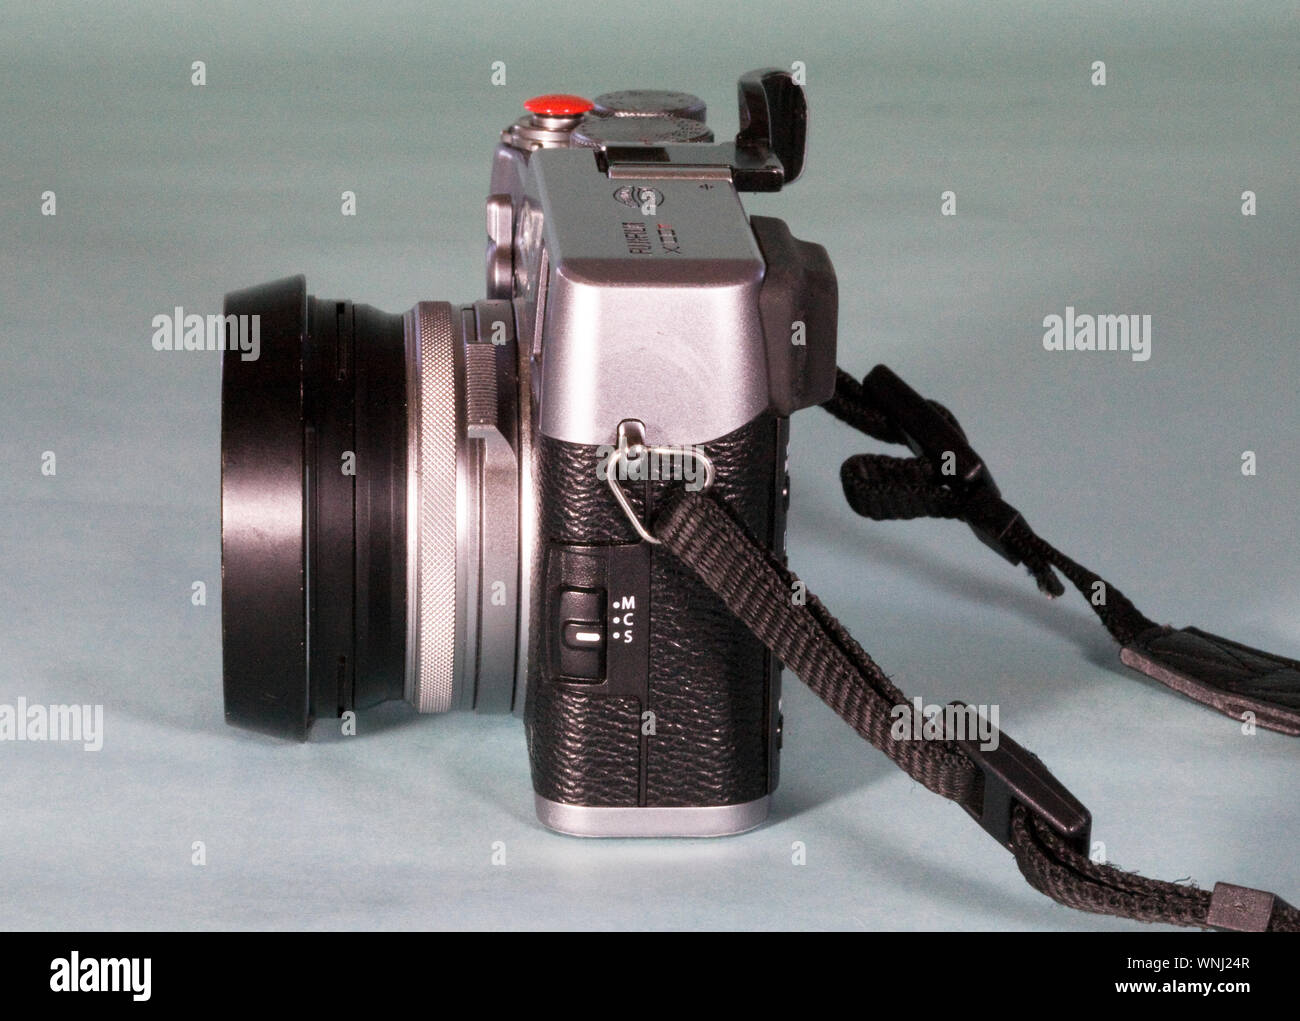 Detail of a Japanese made, DSLR camera, made by Fuji, with a fixed focus lens. Stock Photo